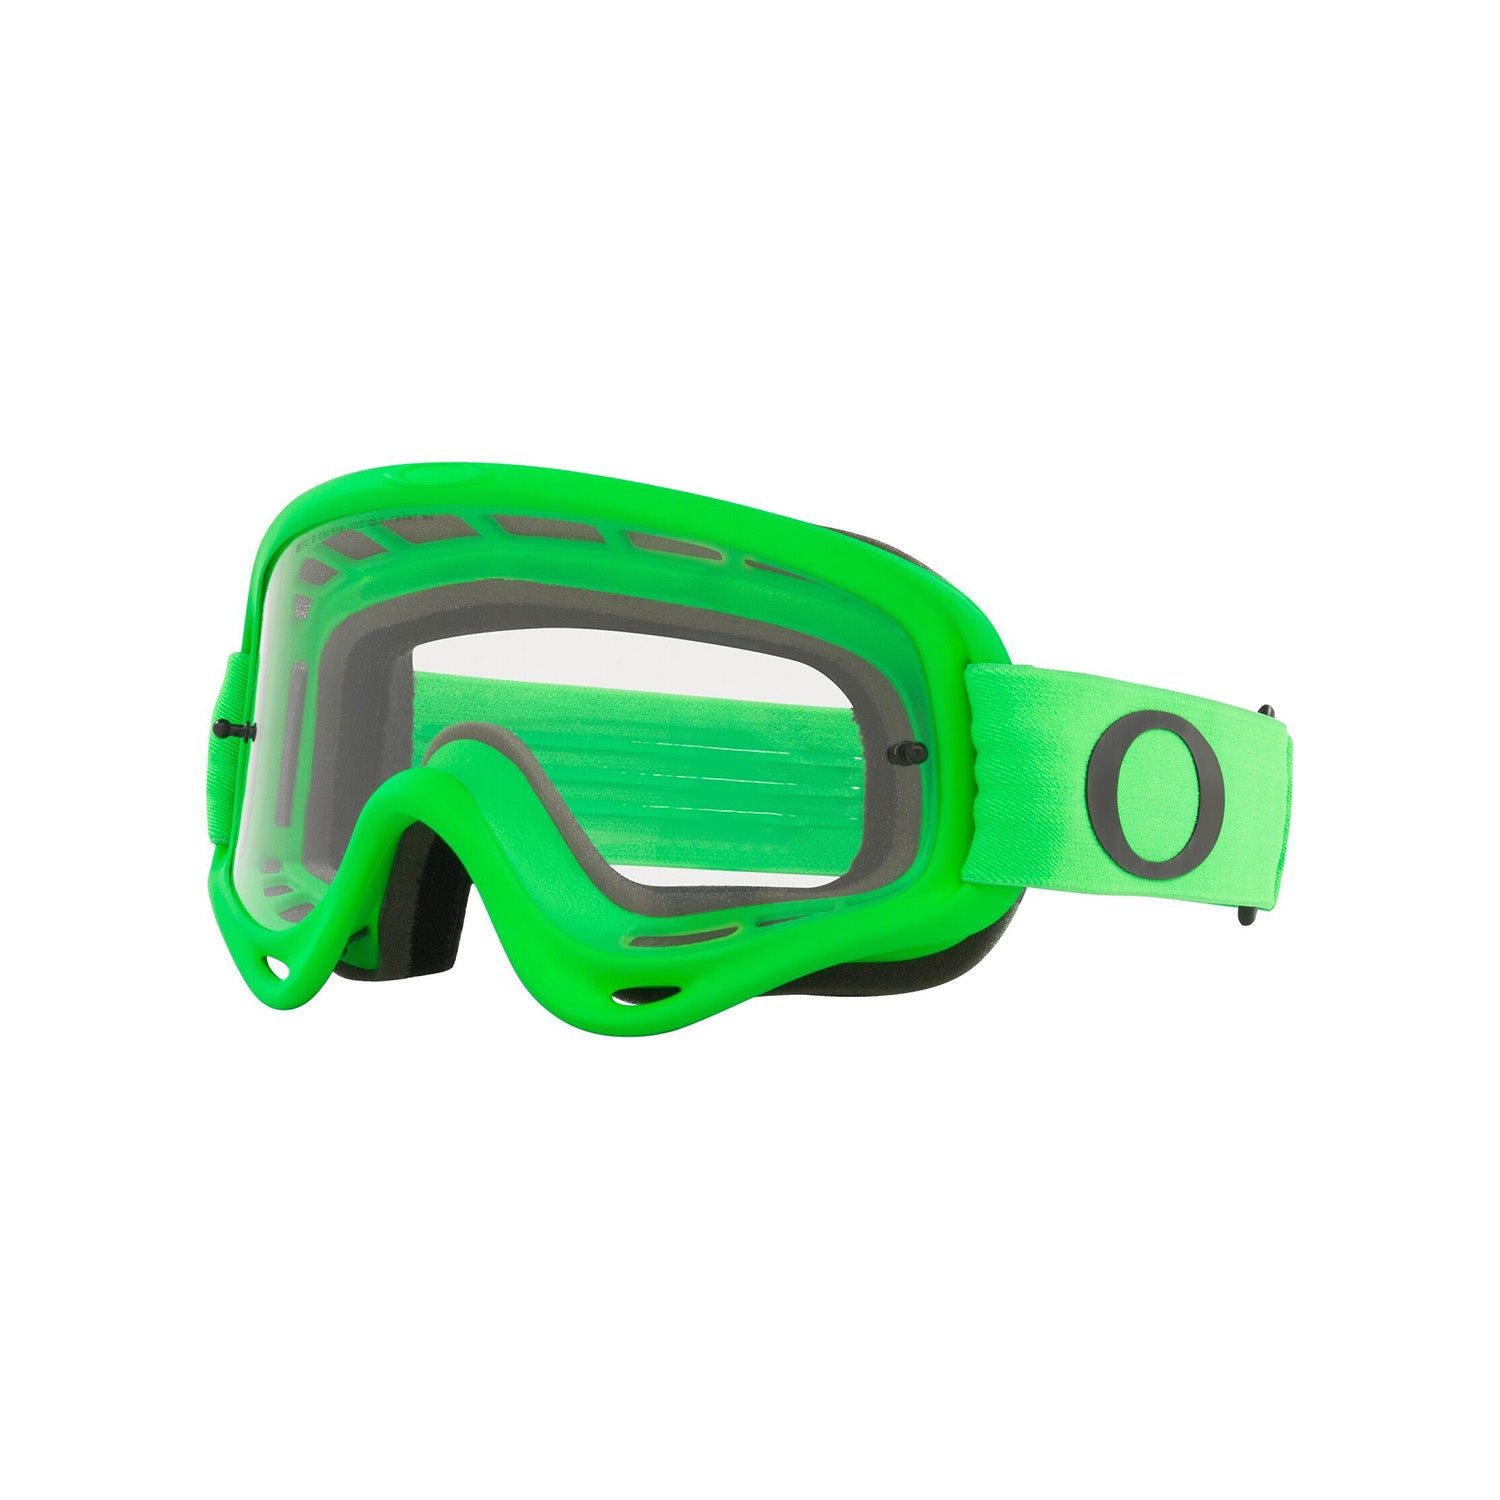 Oakley O Frame MX Goggle in Moto Green with Clear Lens